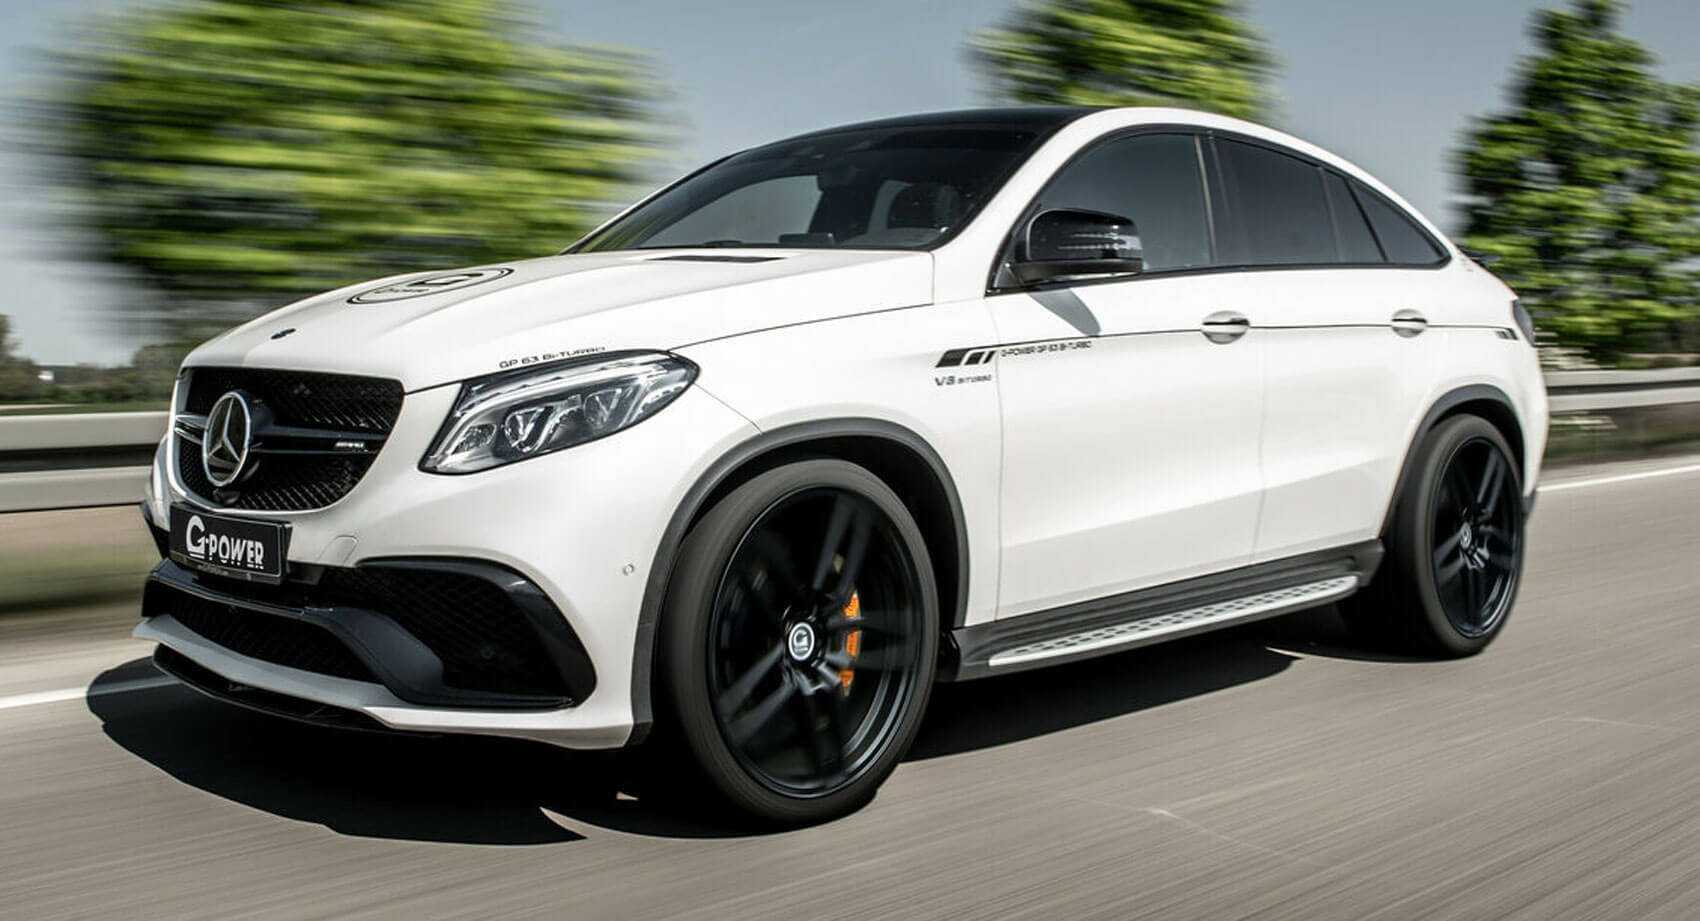 Mercedes Gle 63 Brabus 800 SUV Coupe is a more potent MercedesAMG